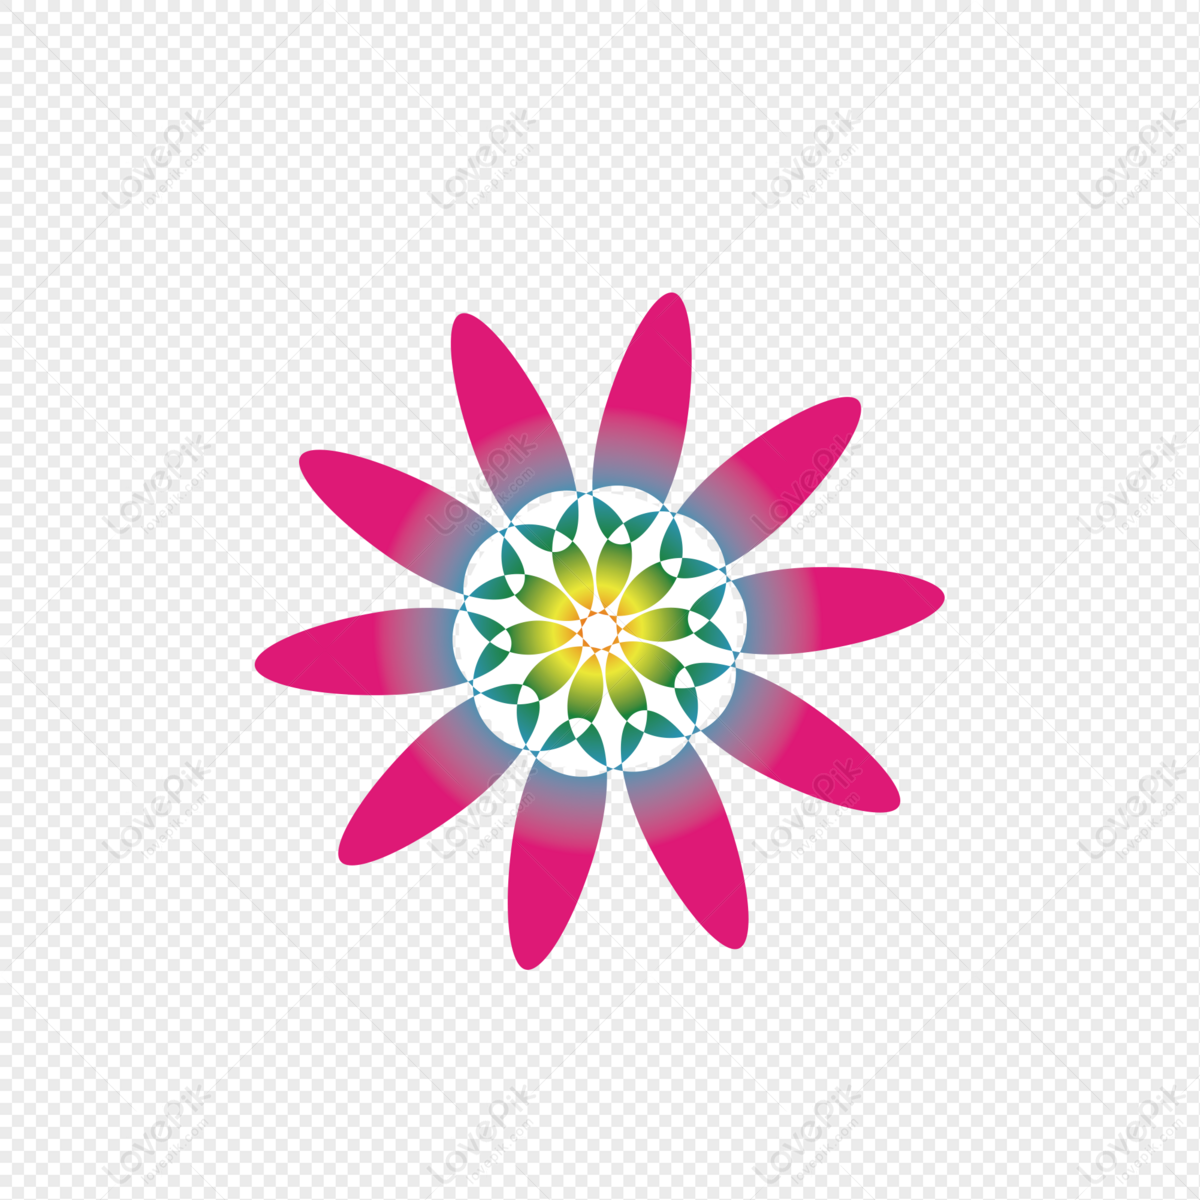 Red Chrysanthemum PNG Free Download And Clipart Image For Free Download ...